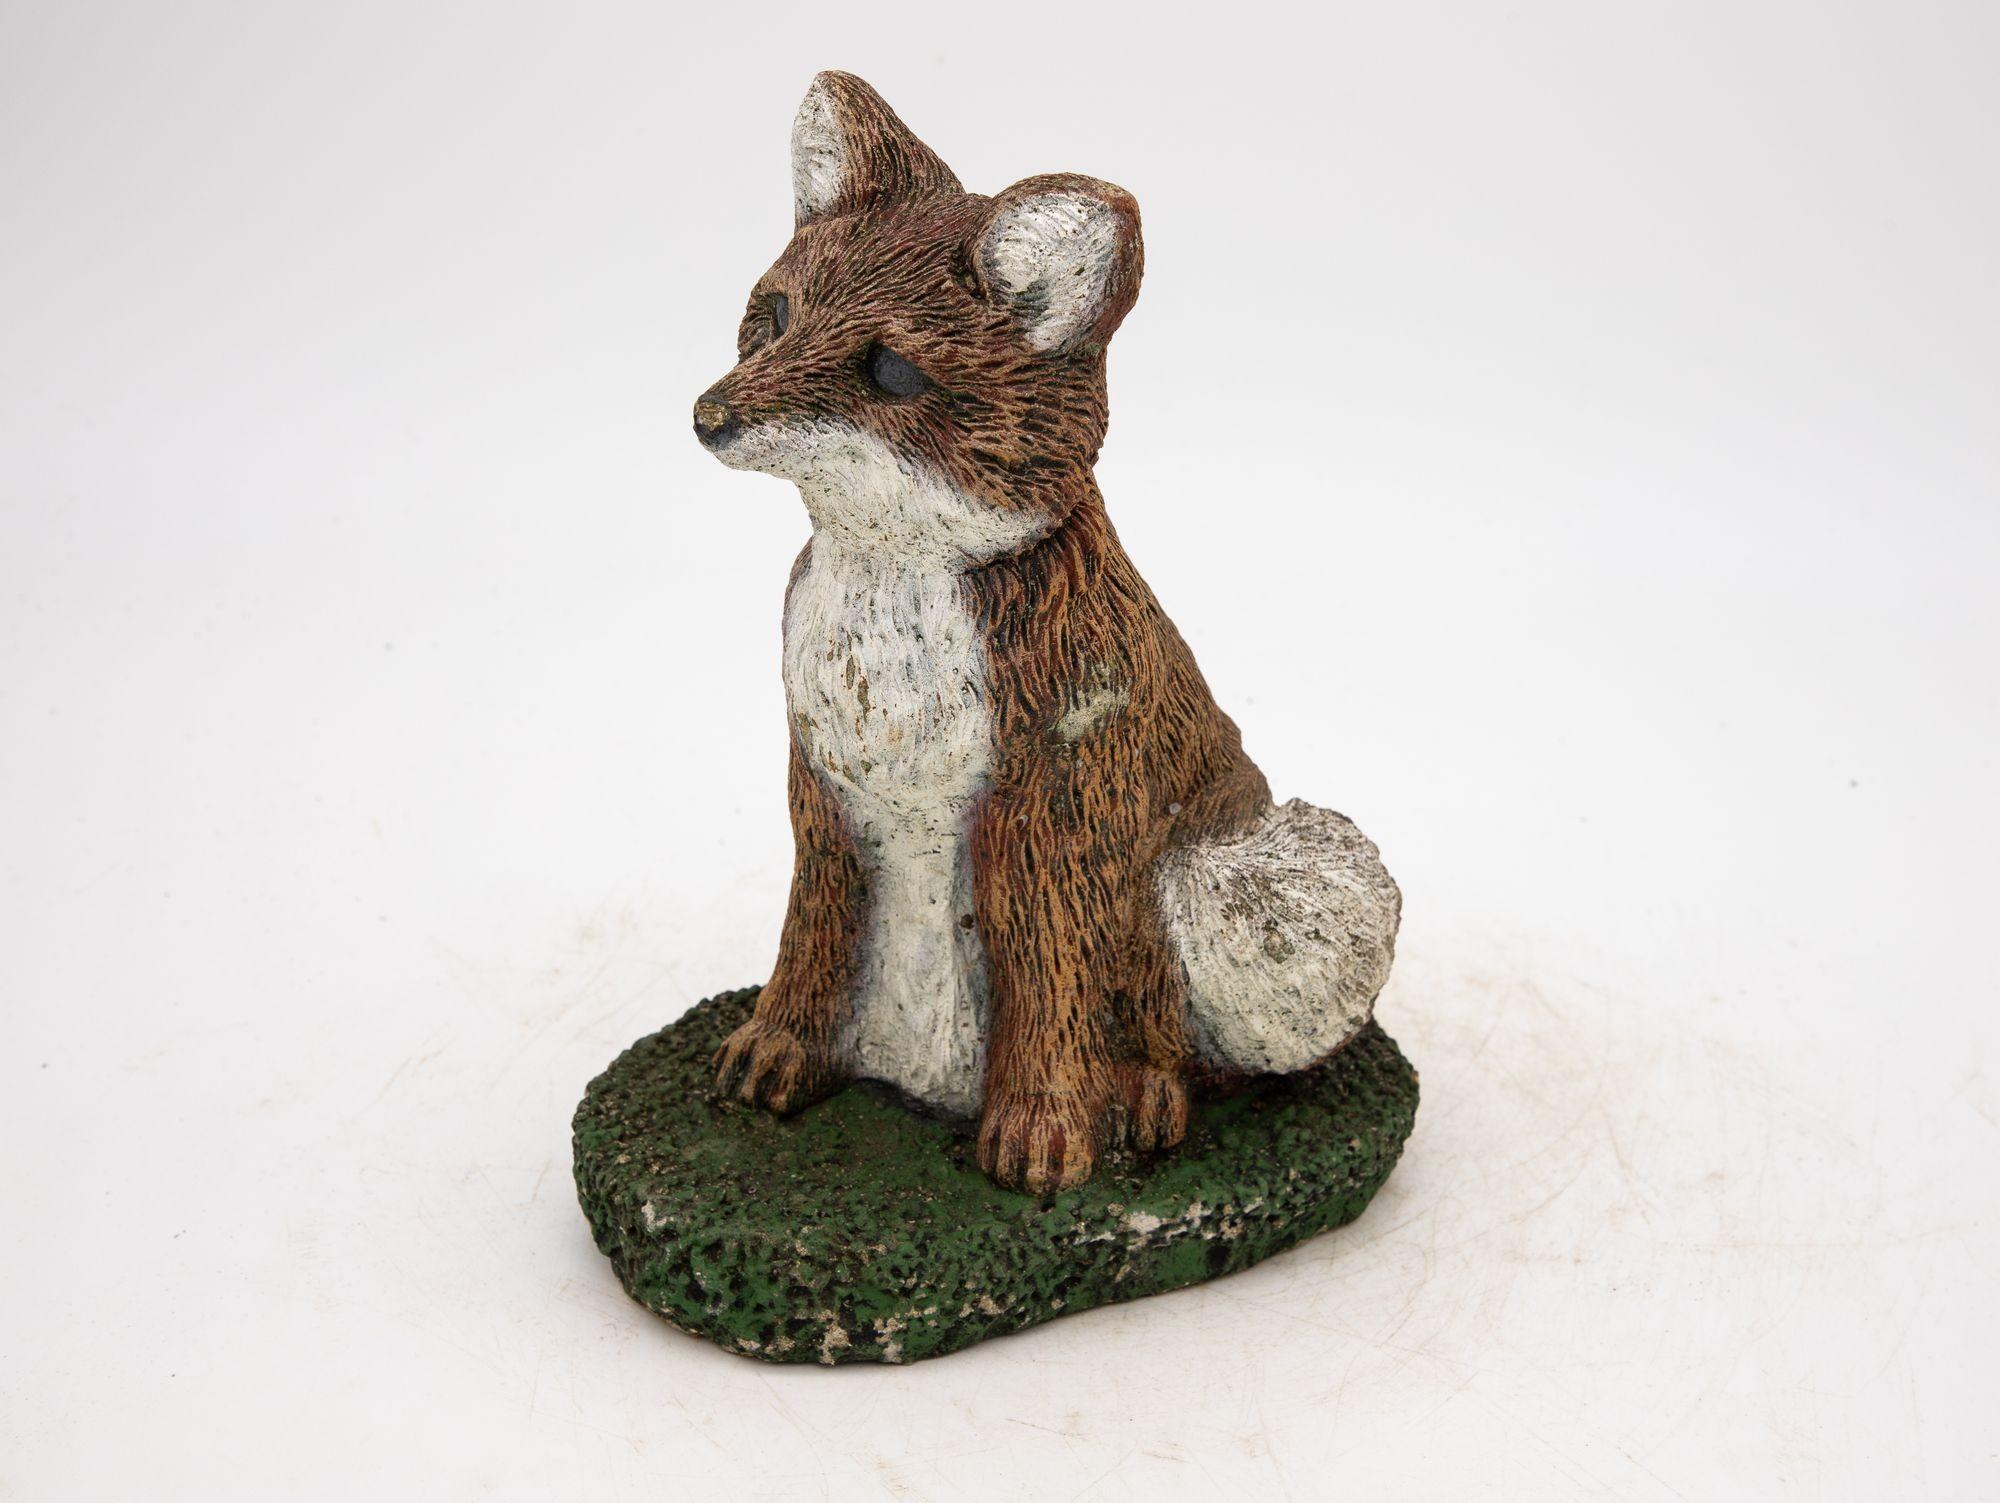 This charming fox small garden ornament is a delightful addition to any outdoor space. Crafted from durable concrete, it depicts a small fox sitting in the grass. Retaining much of the original ruddy brown, white, and green paint adds a touch of